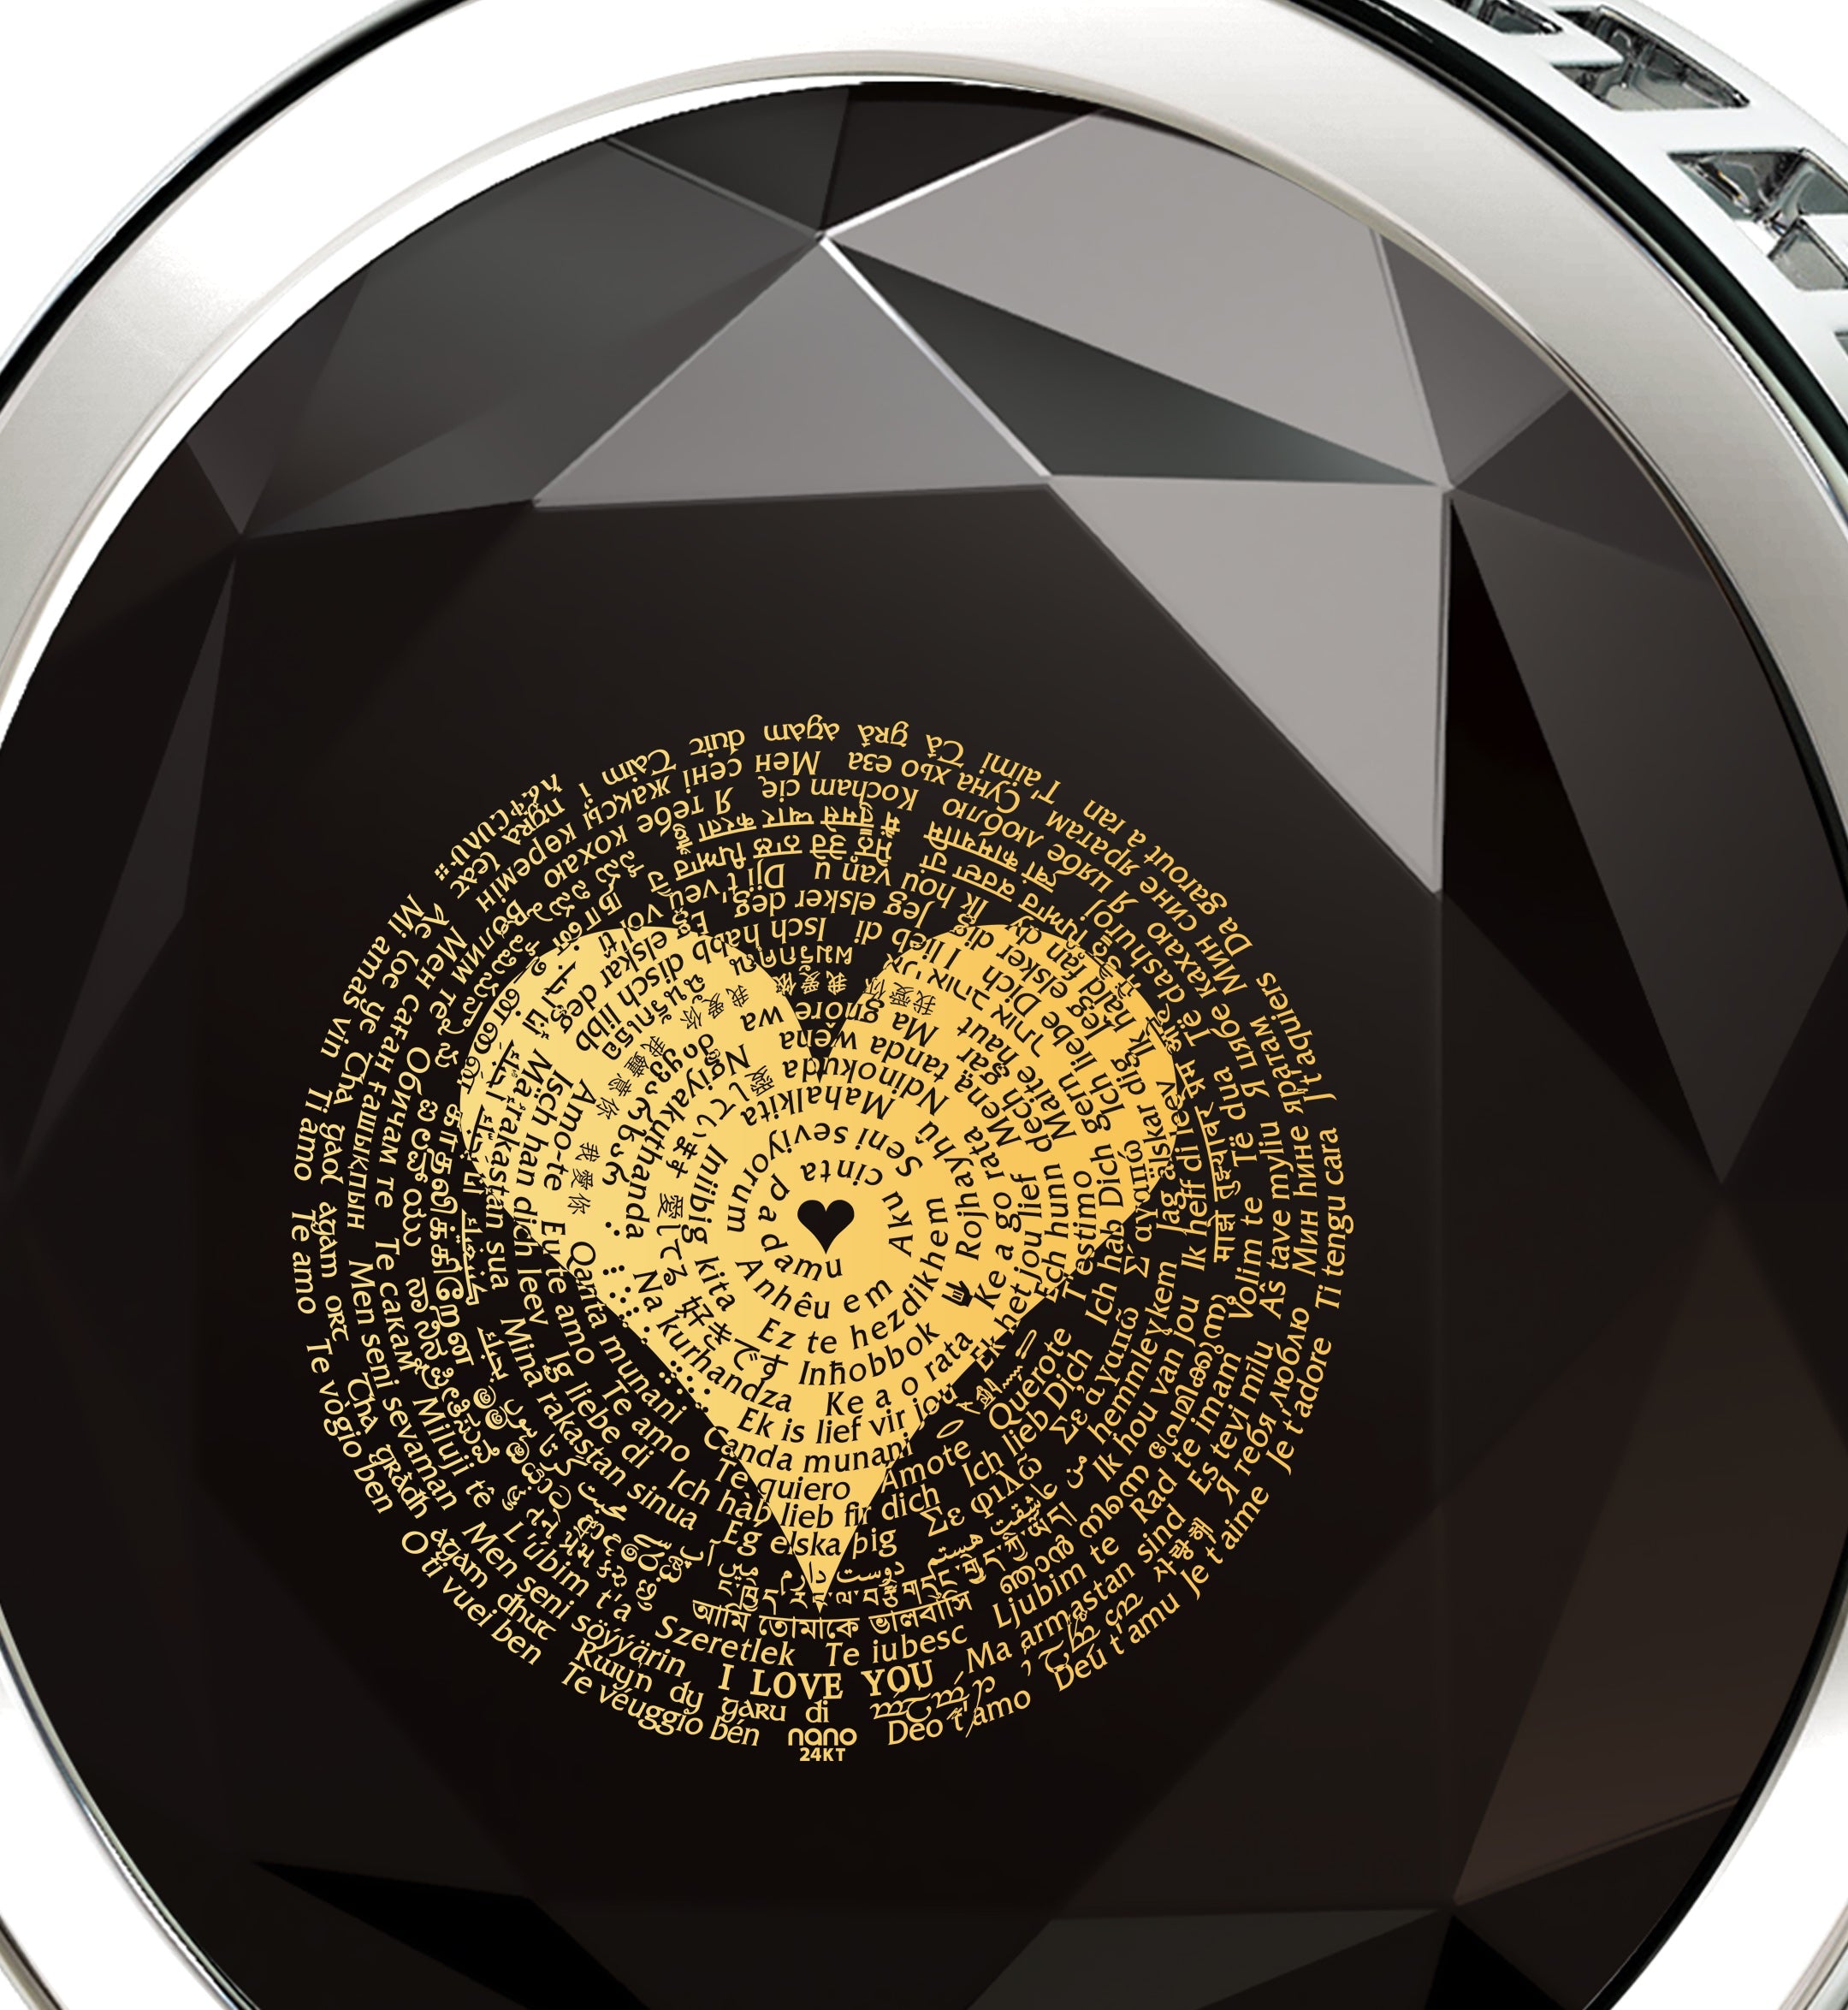 Close-up of a pin with a multifaceted 925 Sterling Silver I Love You Necklace 24k Gold Inscribed 120 Languages pendant design featuring a central heart made of word art within a circular frame.